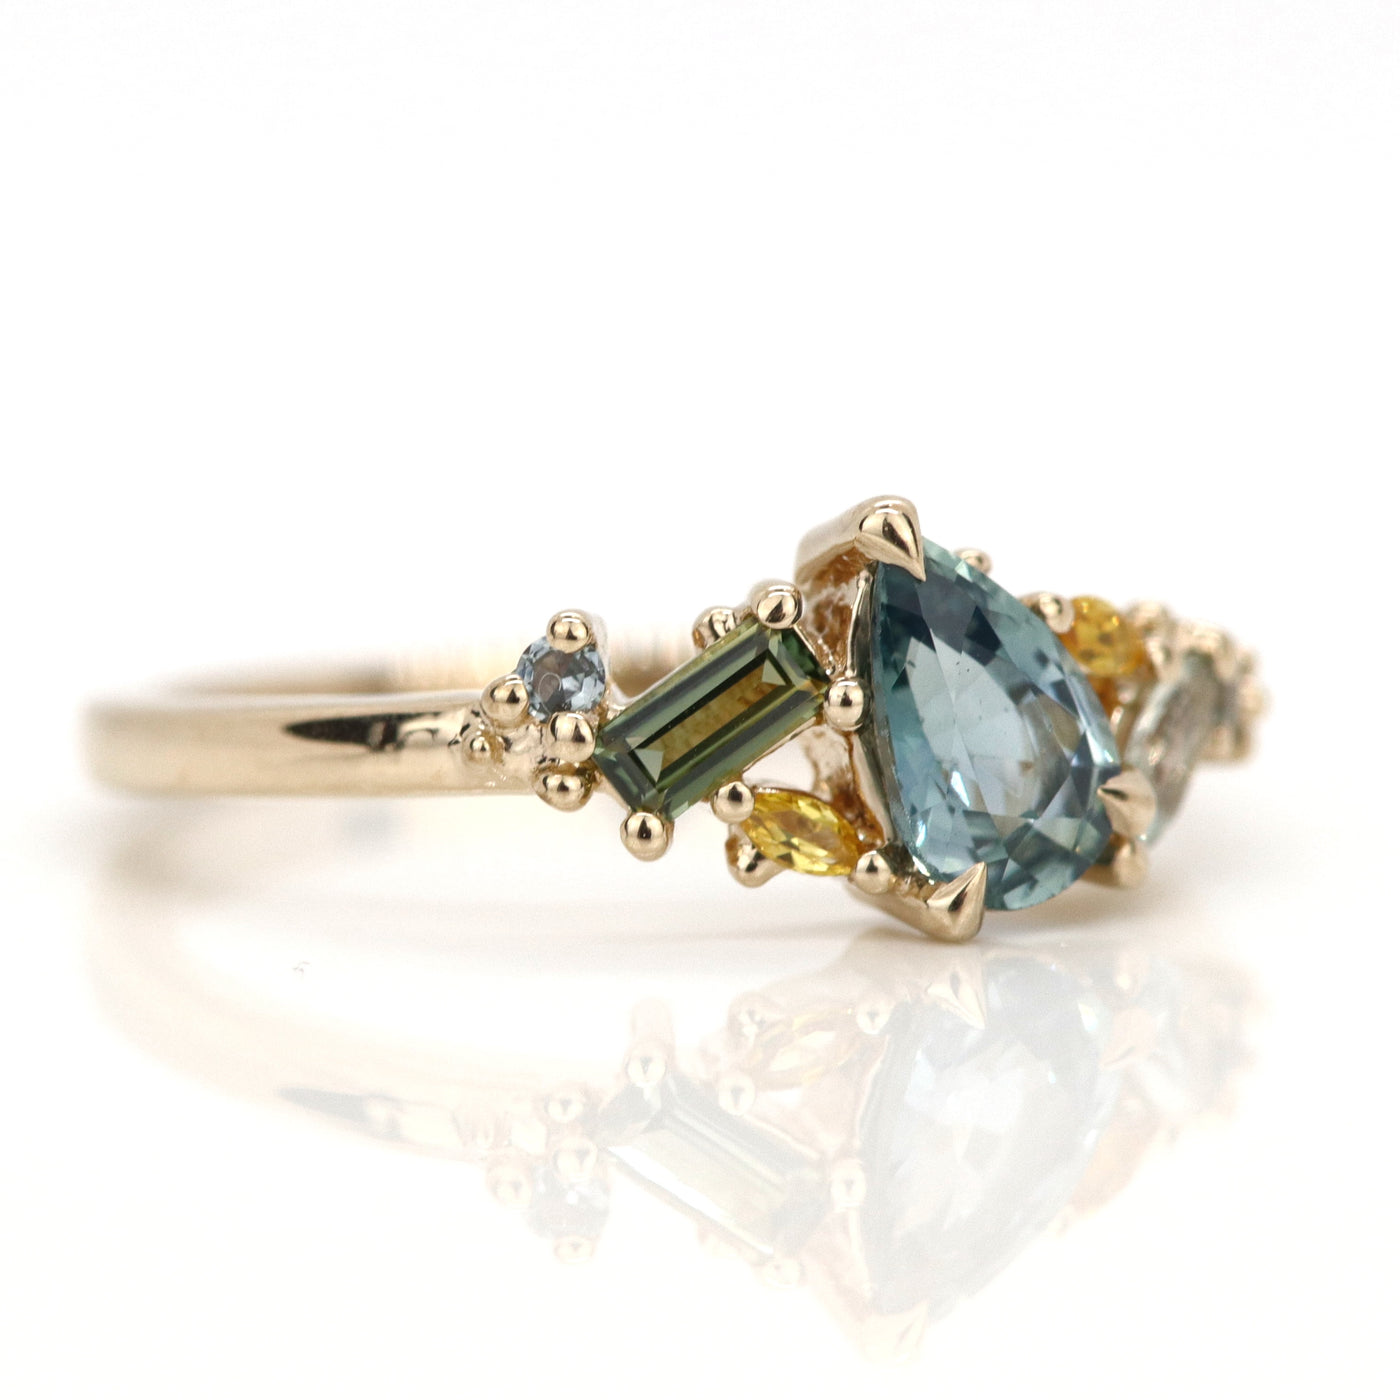 Baleal Blue Sapphire Cluster Ring